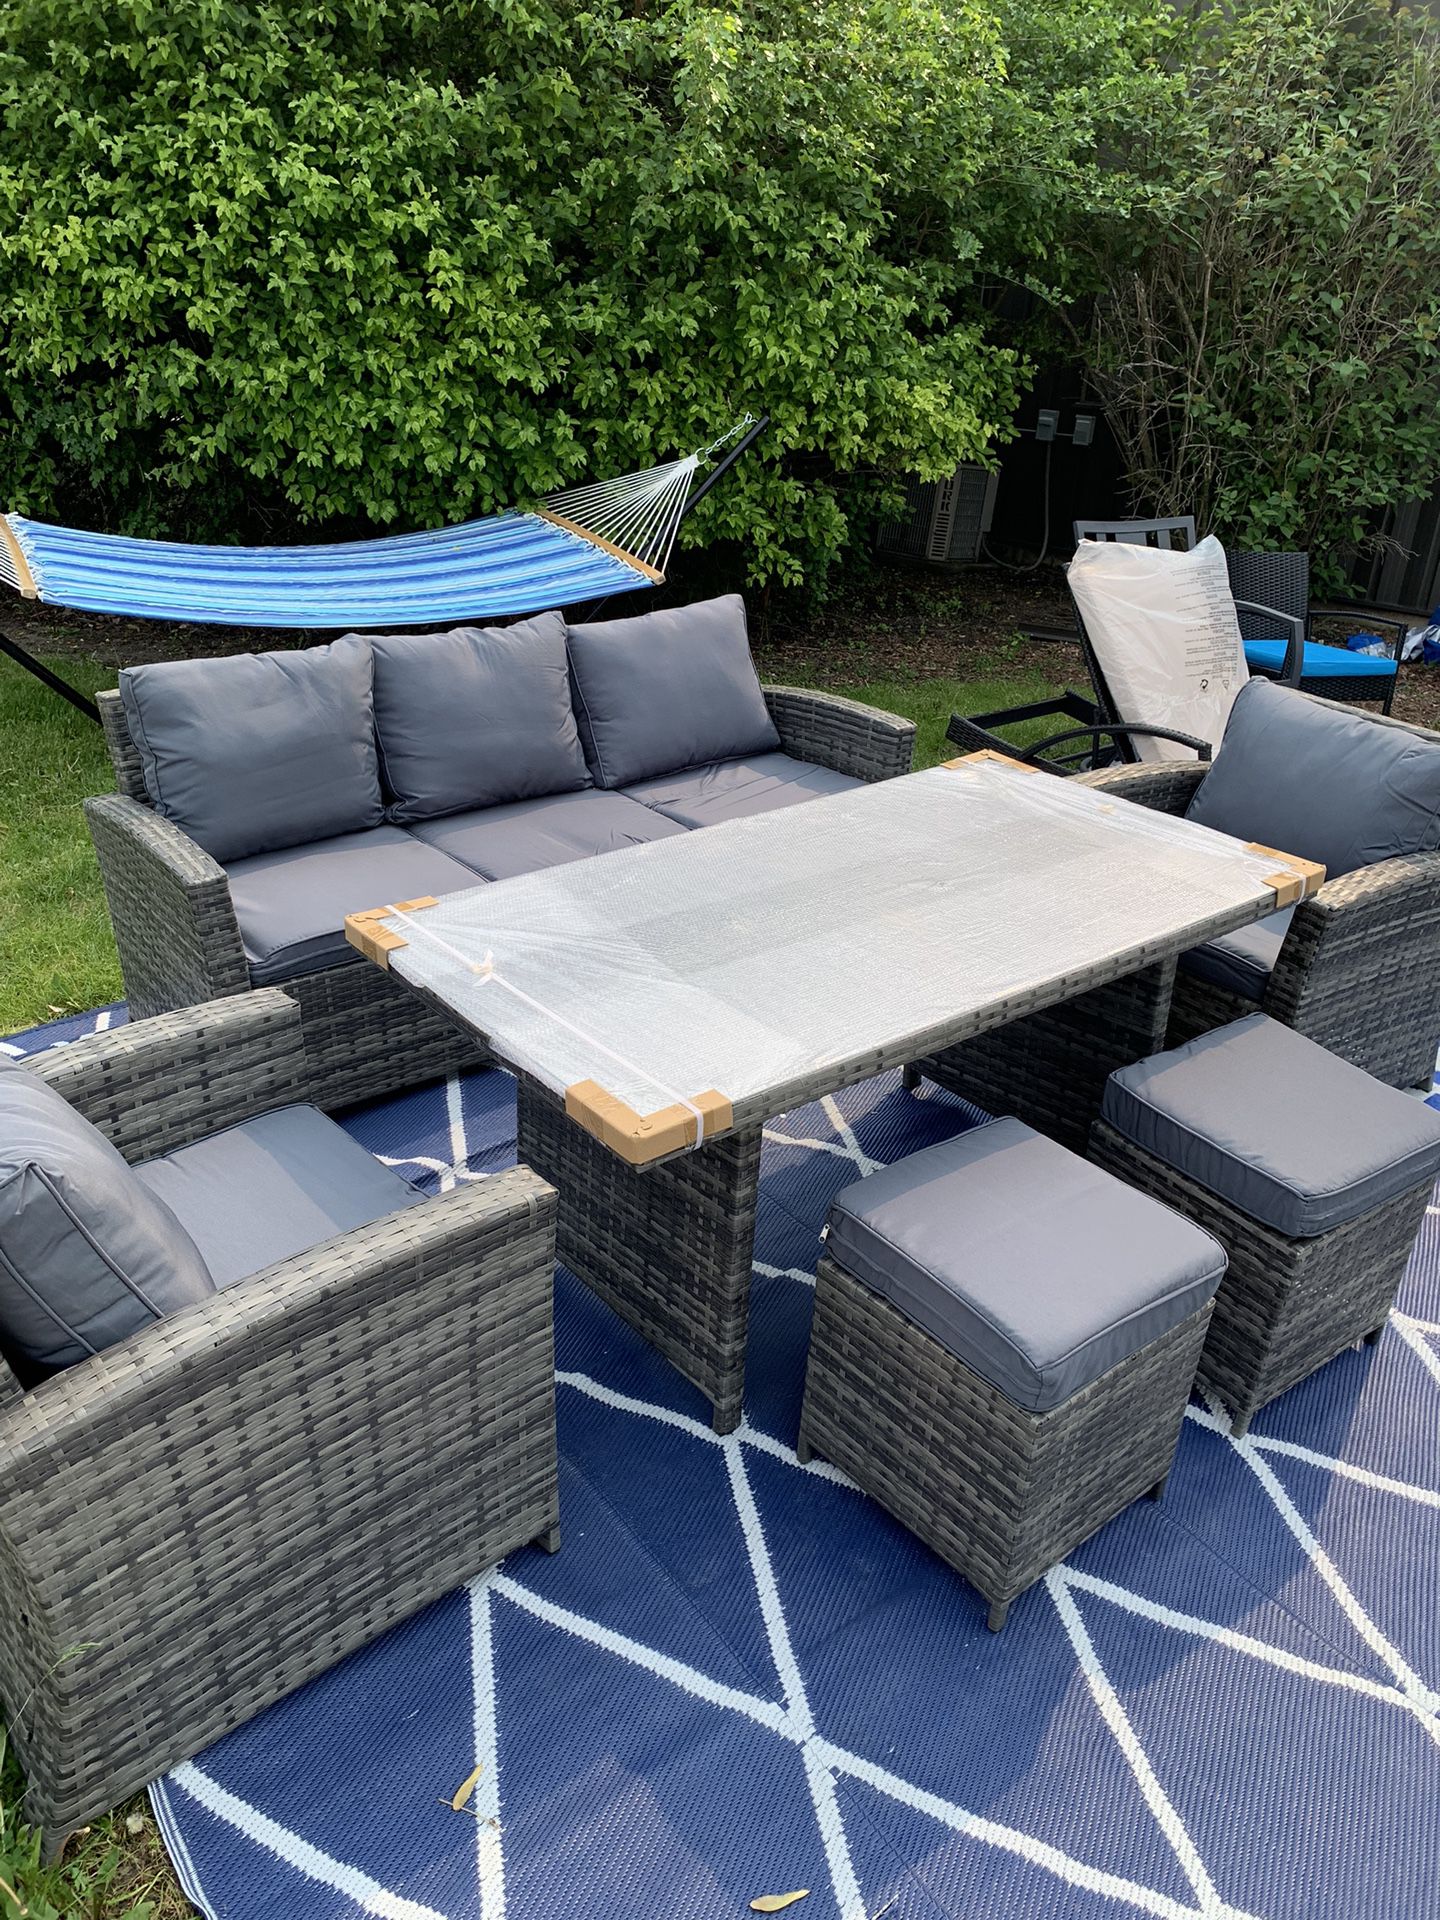 Patio Outdoor Wicker Dining Set - 3 Seat Couch,Dining Table,2 Chairs,2 Stools*LOCAL DELIVERY*